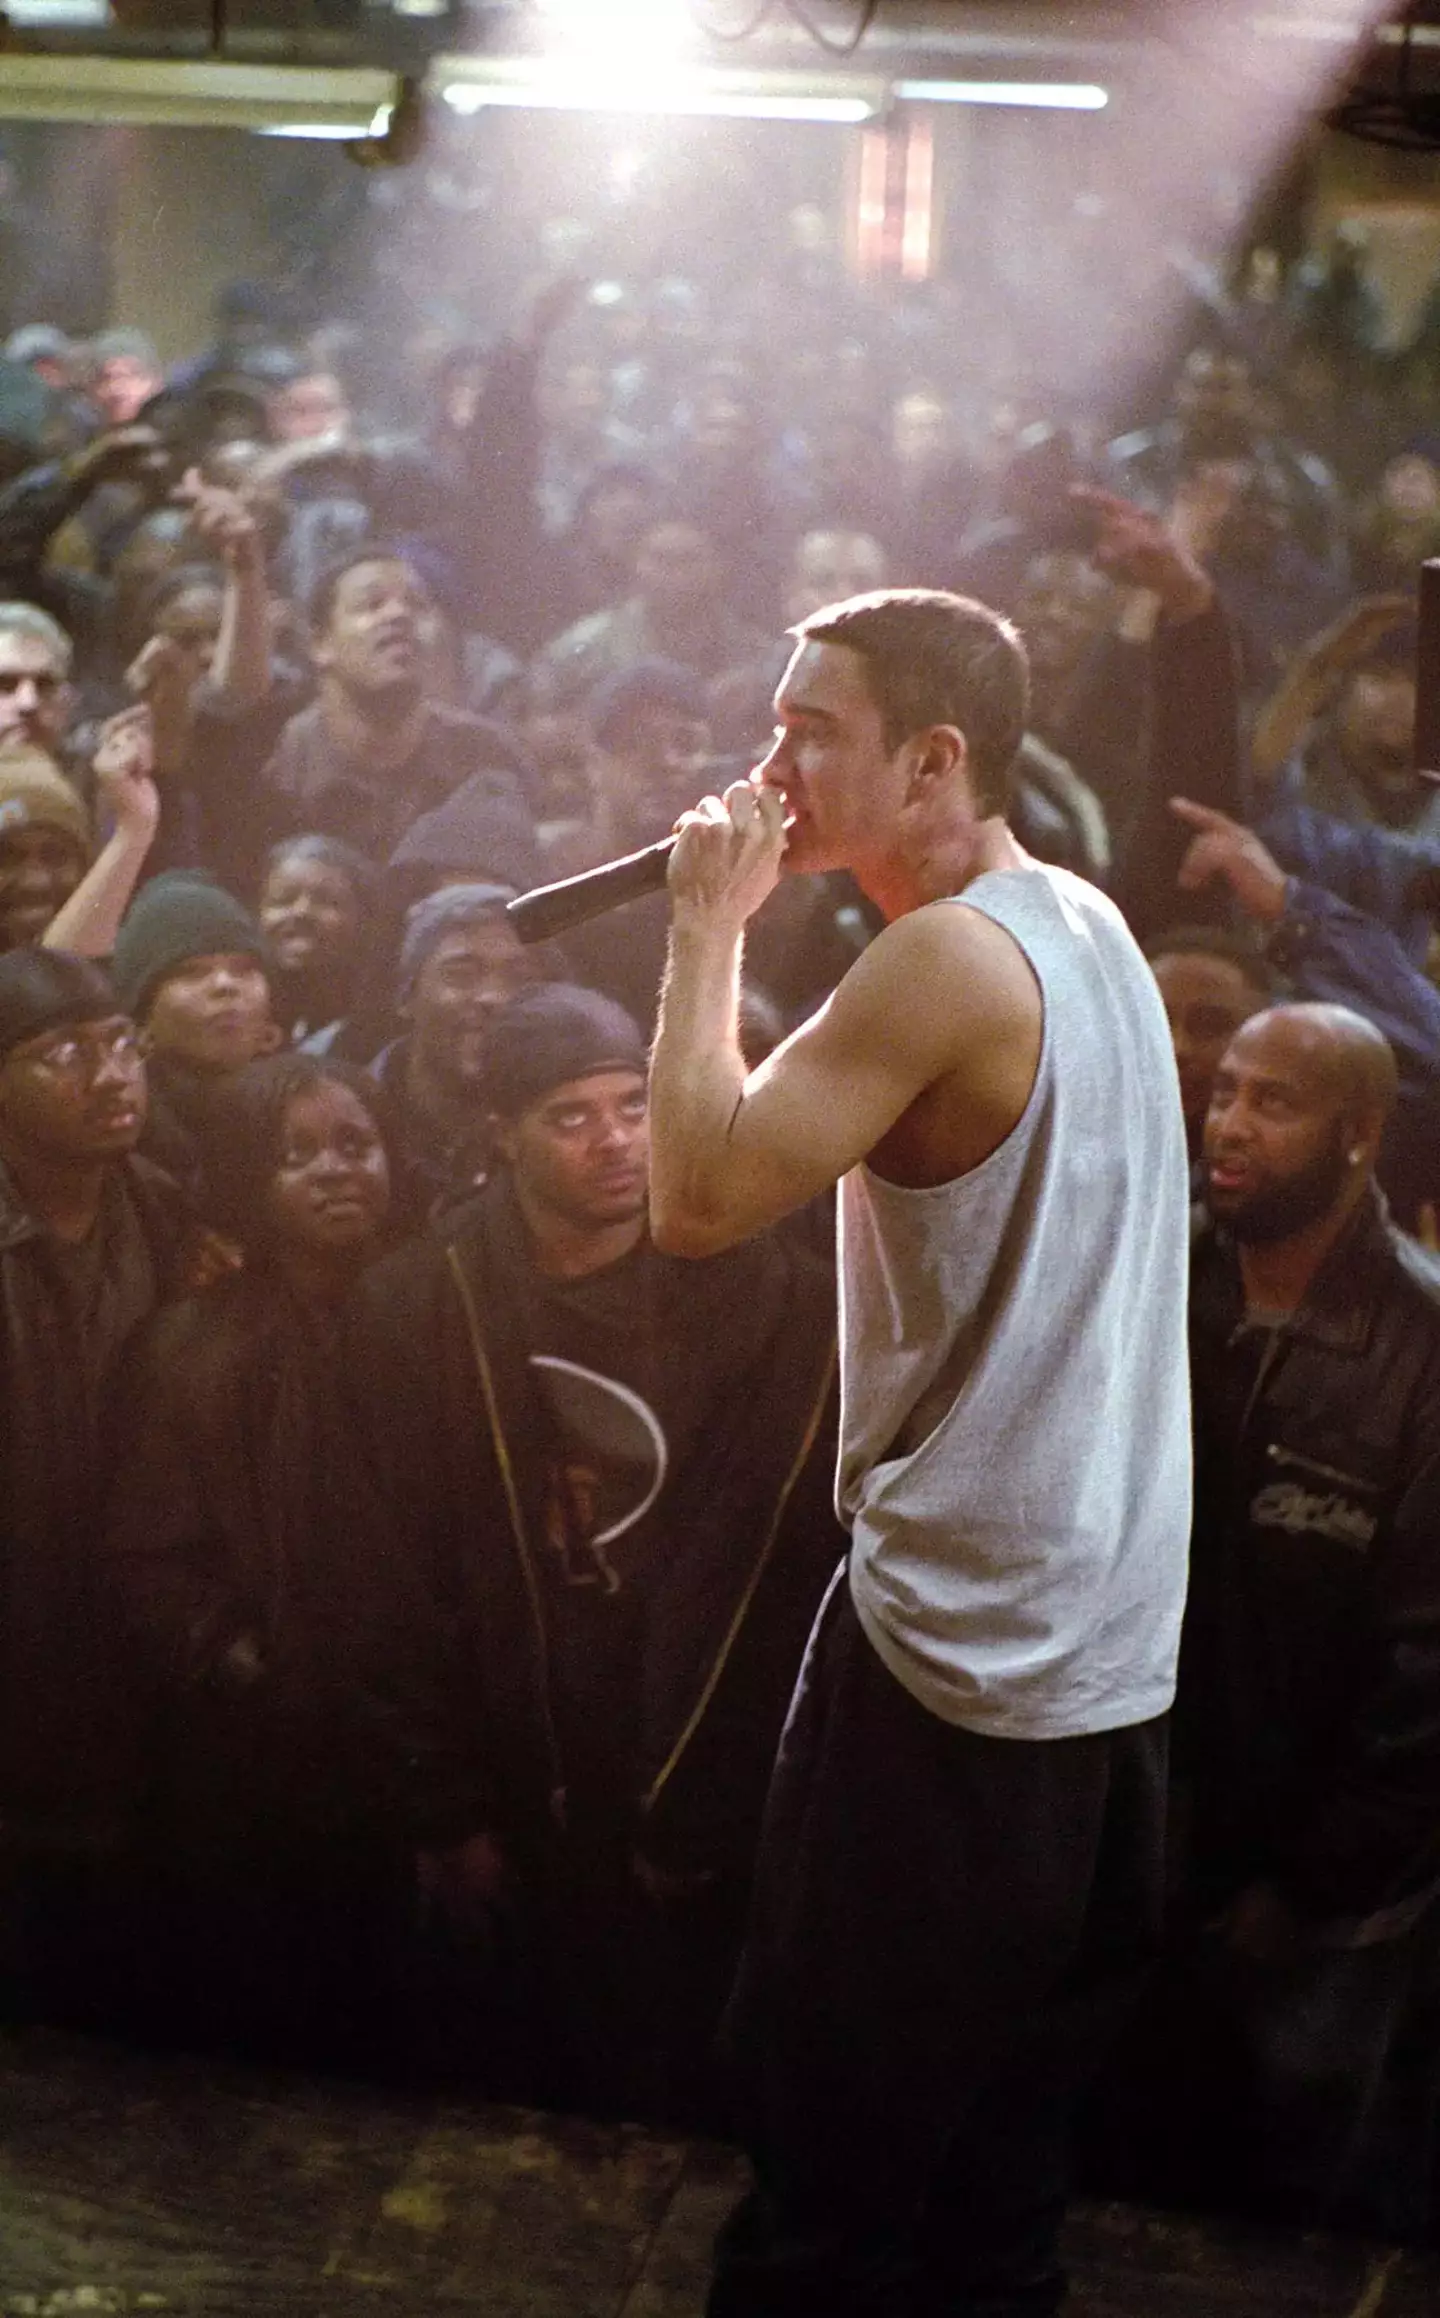 Having shot to fame at young age, Eminem begged his younger self to 'slow down'.